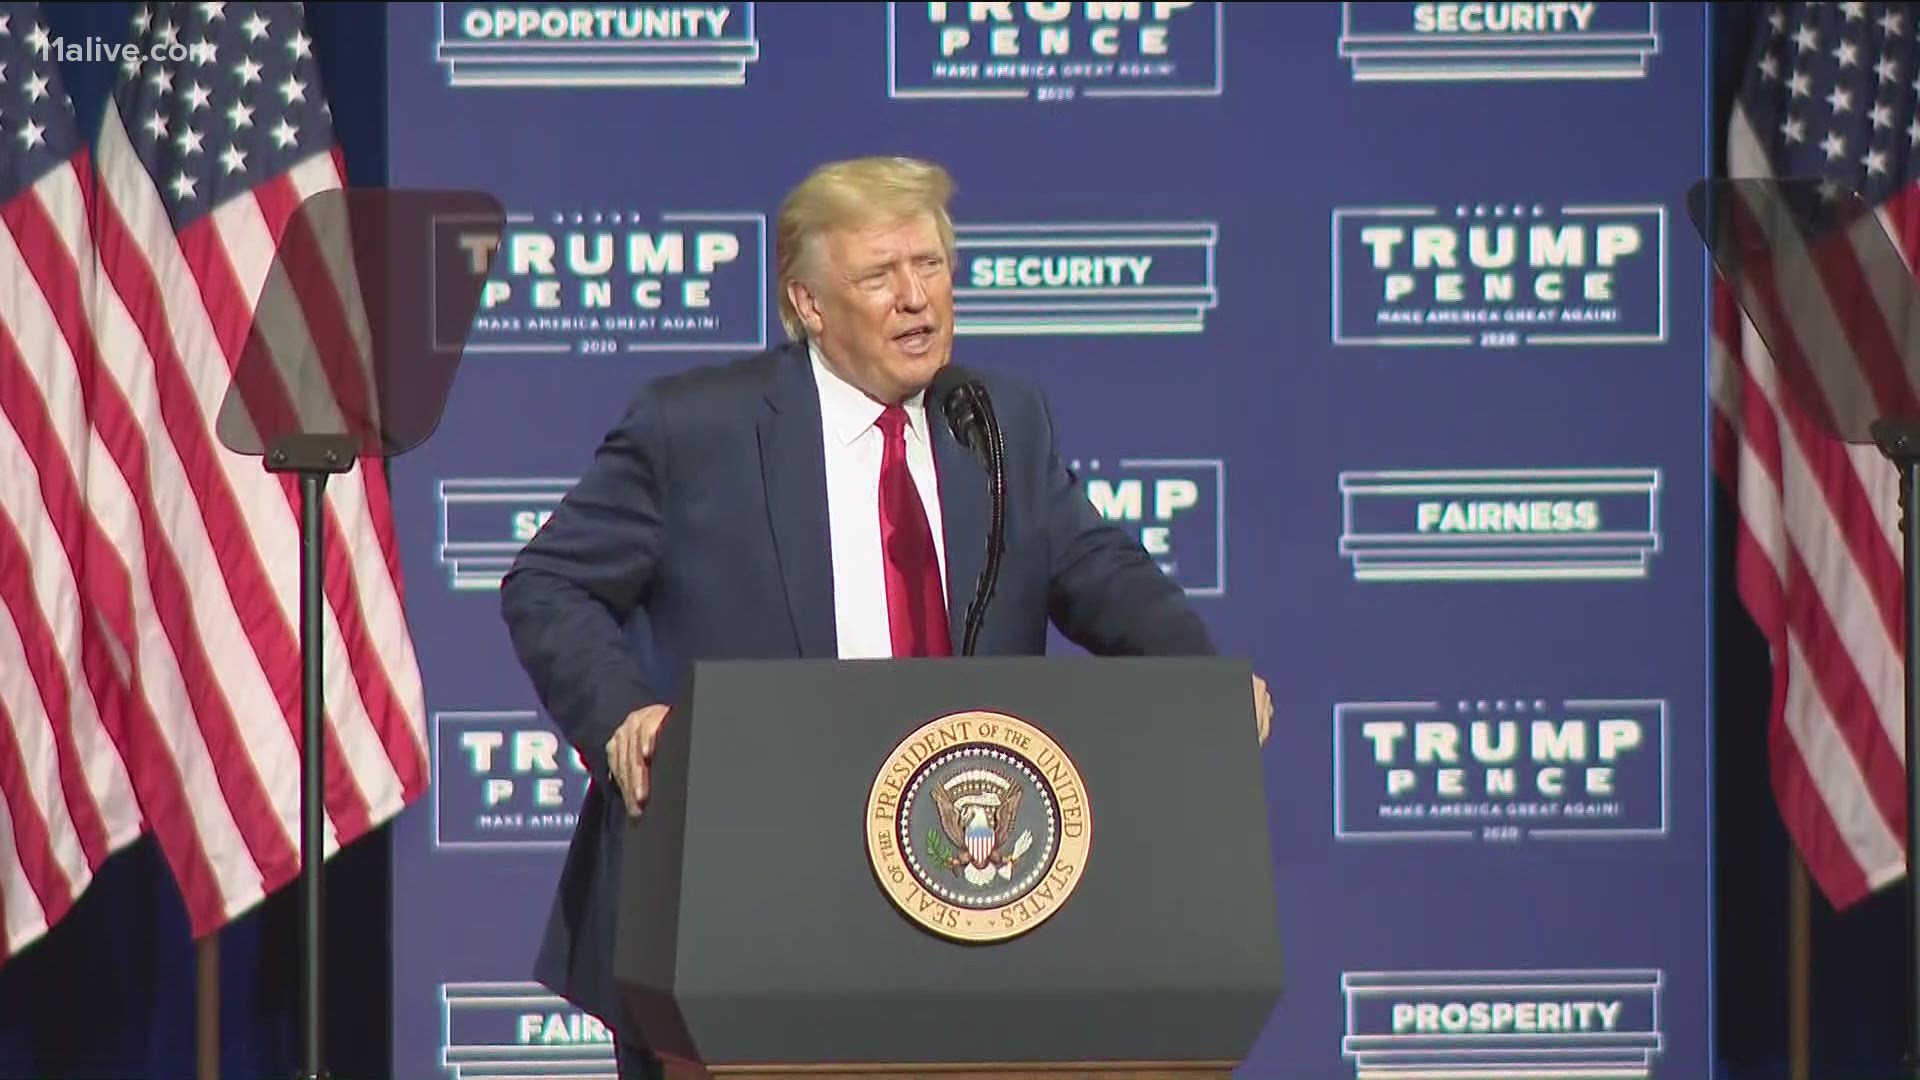 President Donald Trump came to Georgia on Friday with an appeal to Black voters in the state.